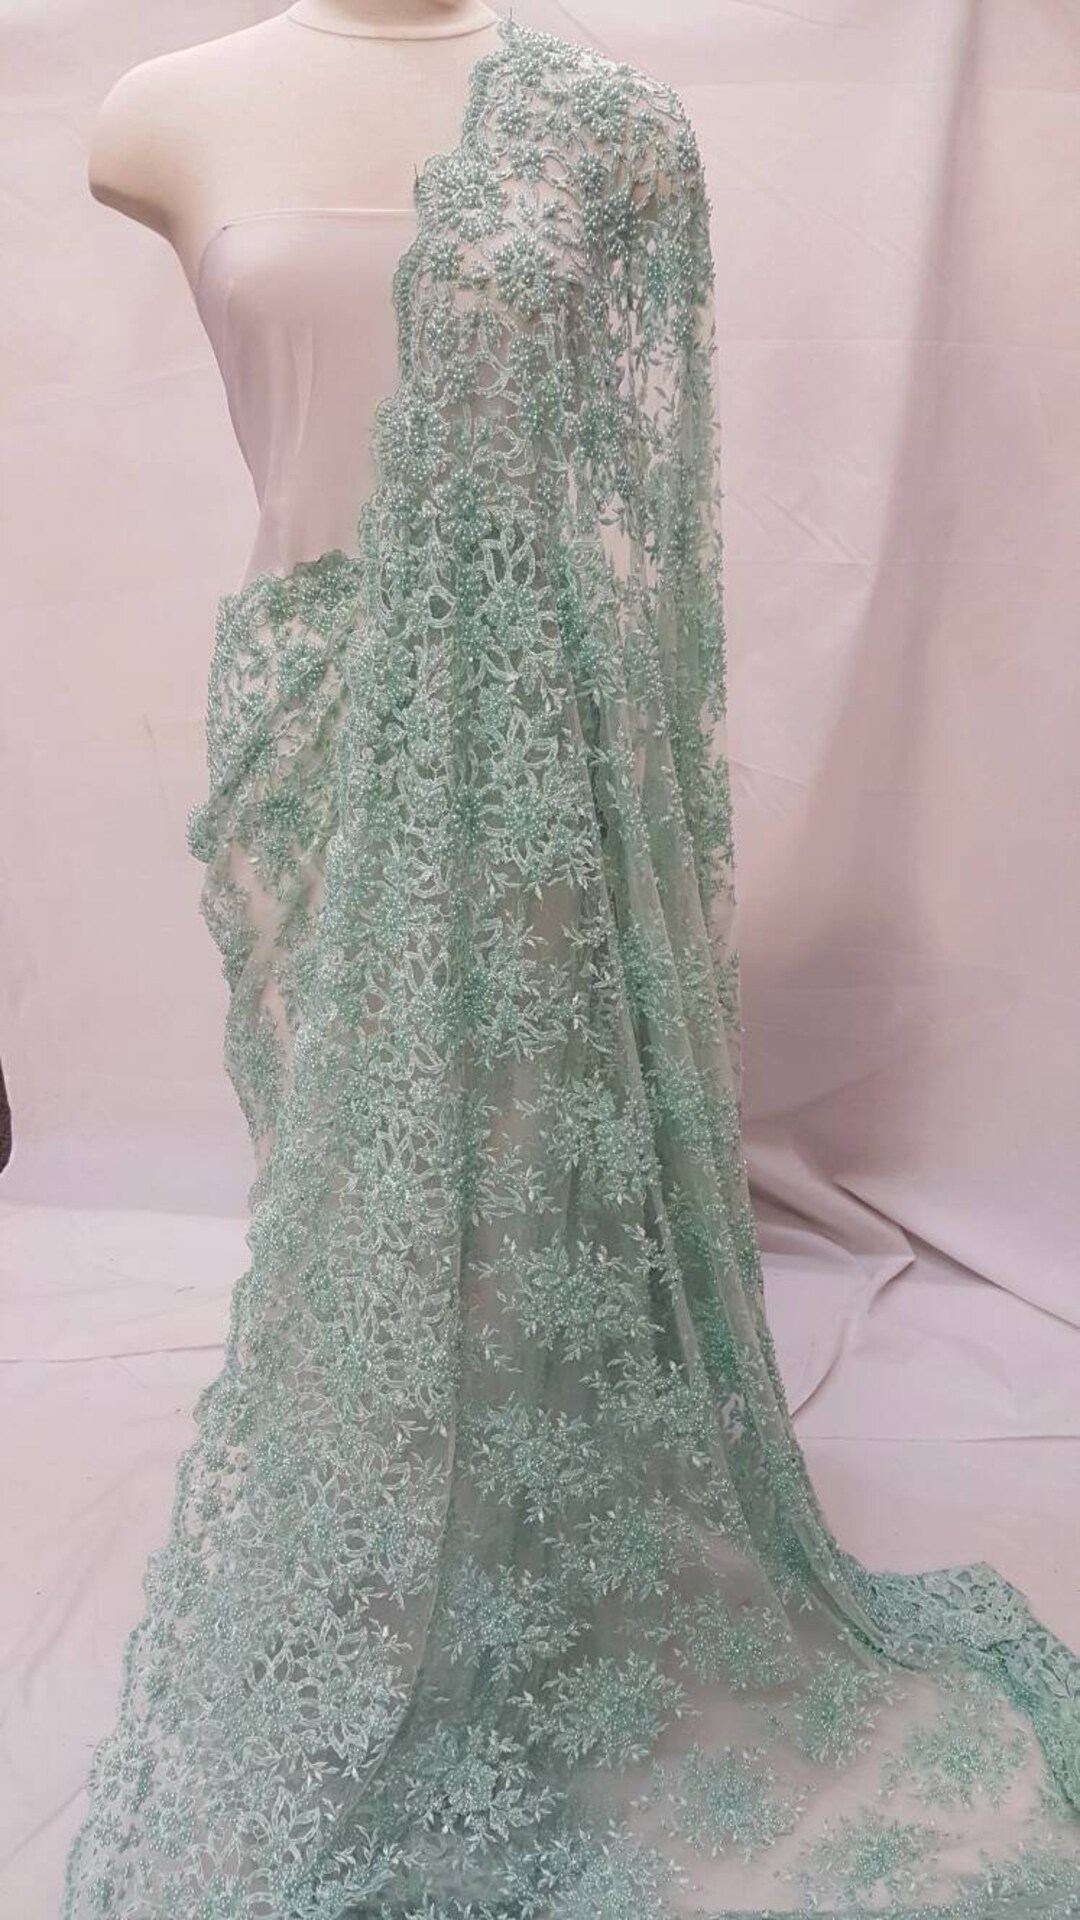 Mint Hand Beaded Lace Floral Flowers Embroidered Pearls on Mesh Prom ...